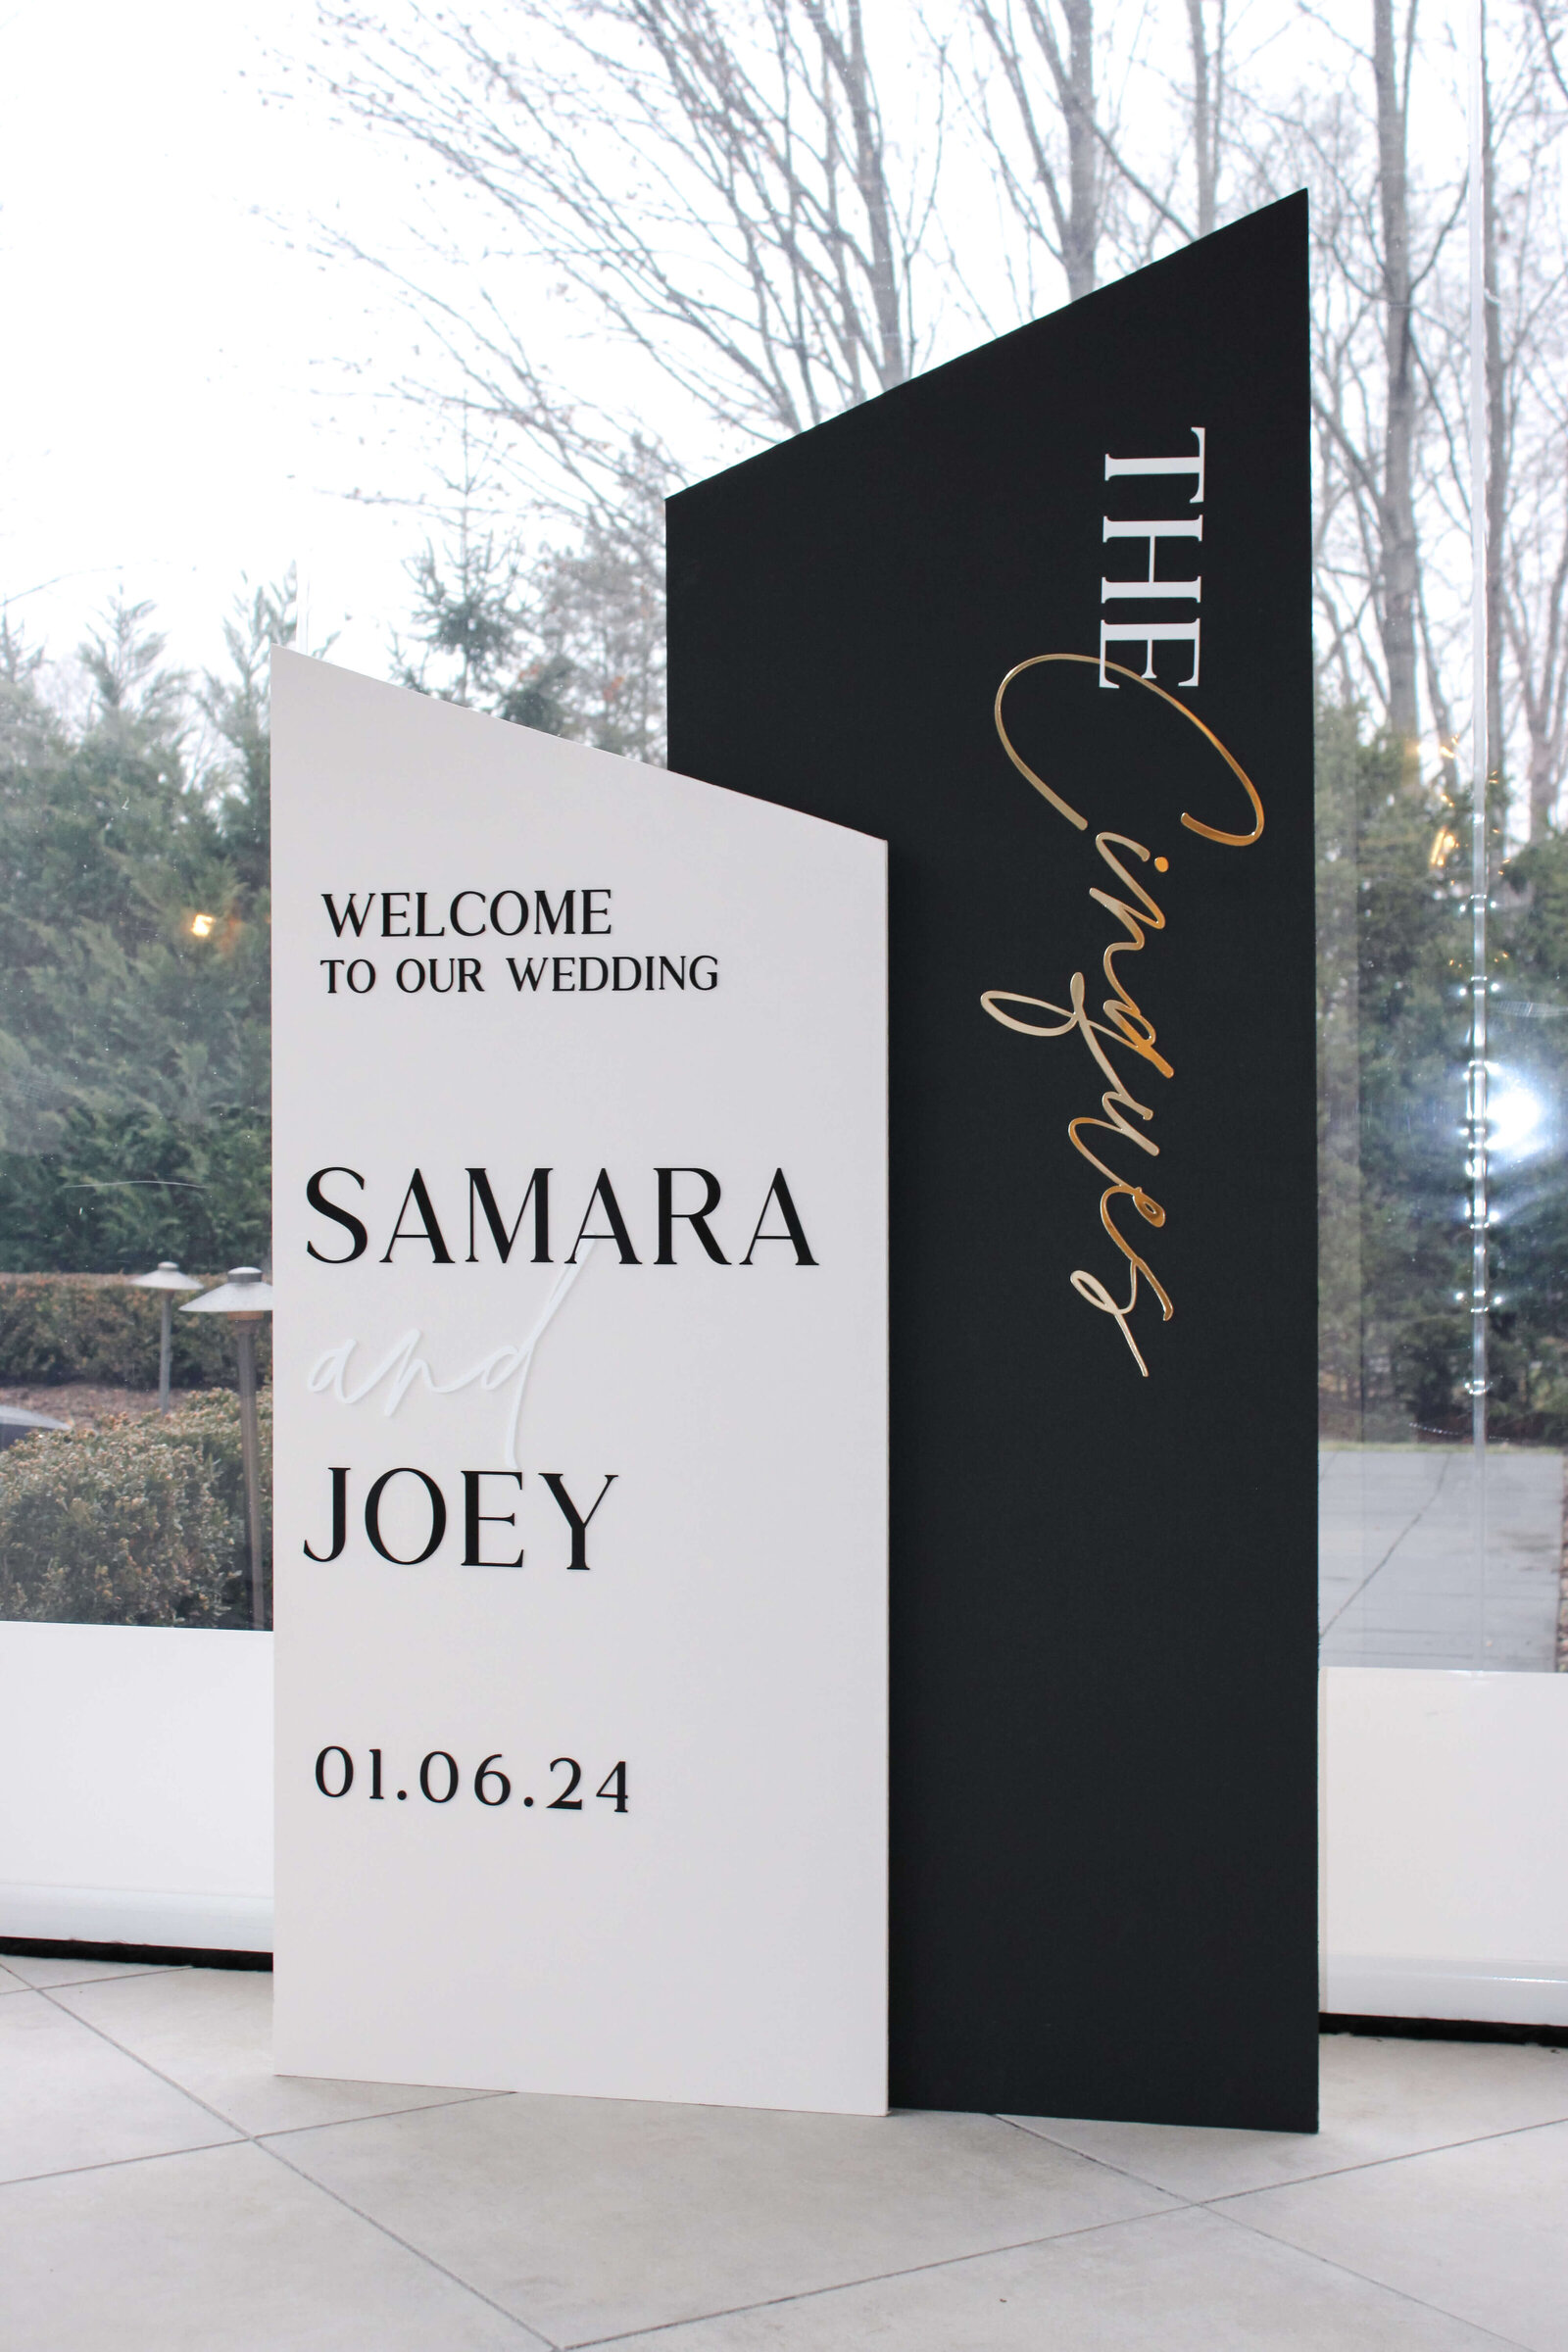 SGH Creative Luxury Wedding Signage & Stationery in New York & New Jersey - Full Gallery (90)